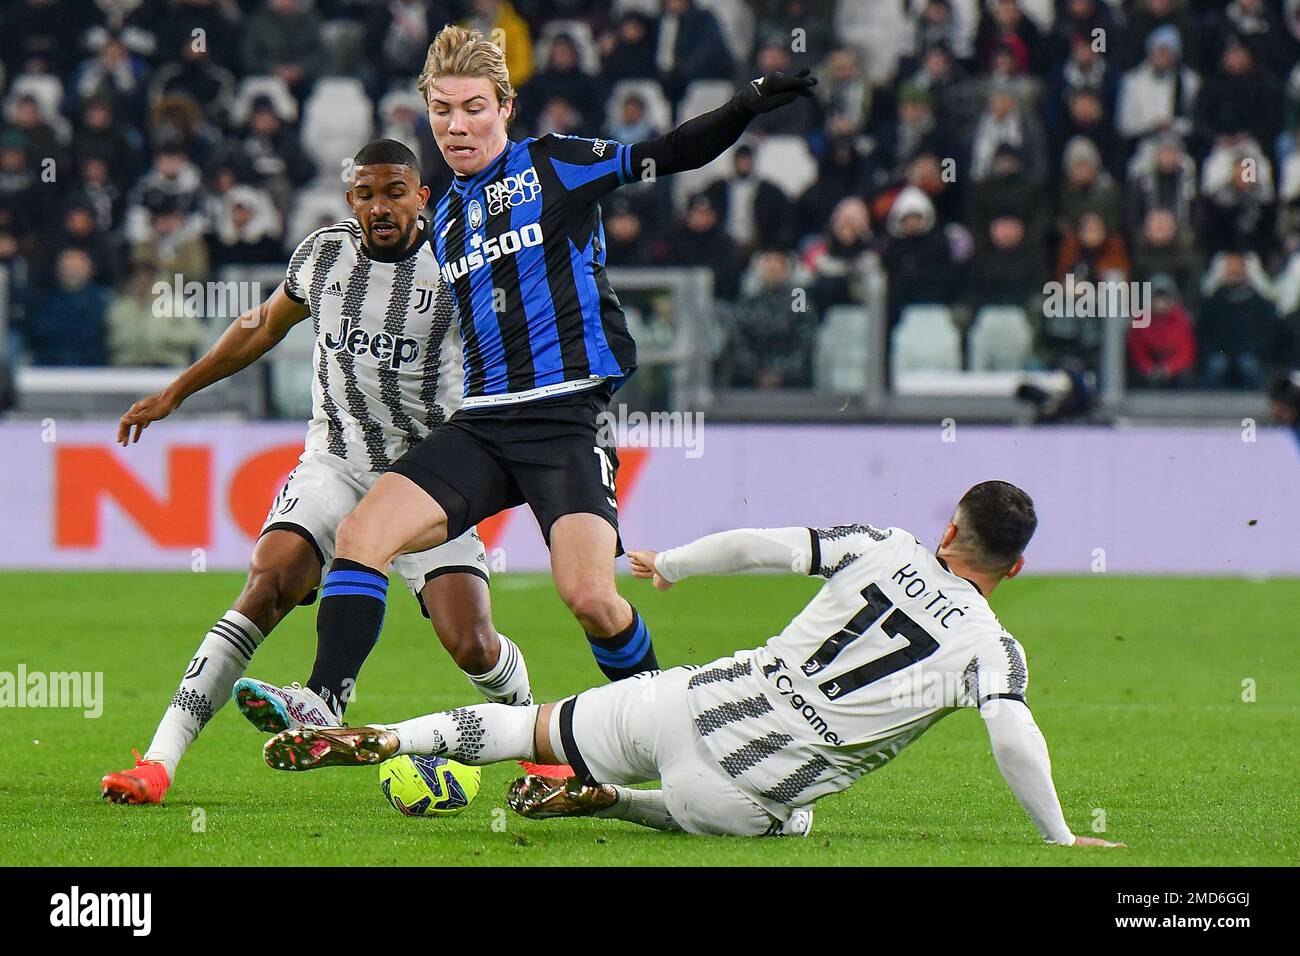 Torino, Italy. 22nd Jan, 2023. Gleison Bremer of Juventus FC, Rasmus Hojlund of Atalanta BC and Filip Kostic of Juventus FC compete for the ball during the Serie A football match between Juventus FC and Atalanta BC at Juventus stadium in Torino (Italy), January 22th, 2022. Photo Giuliano Marchisciano/Insidefoto Credit: Insidefoto di andrea staccioli/Alamy Live News Stock Photo